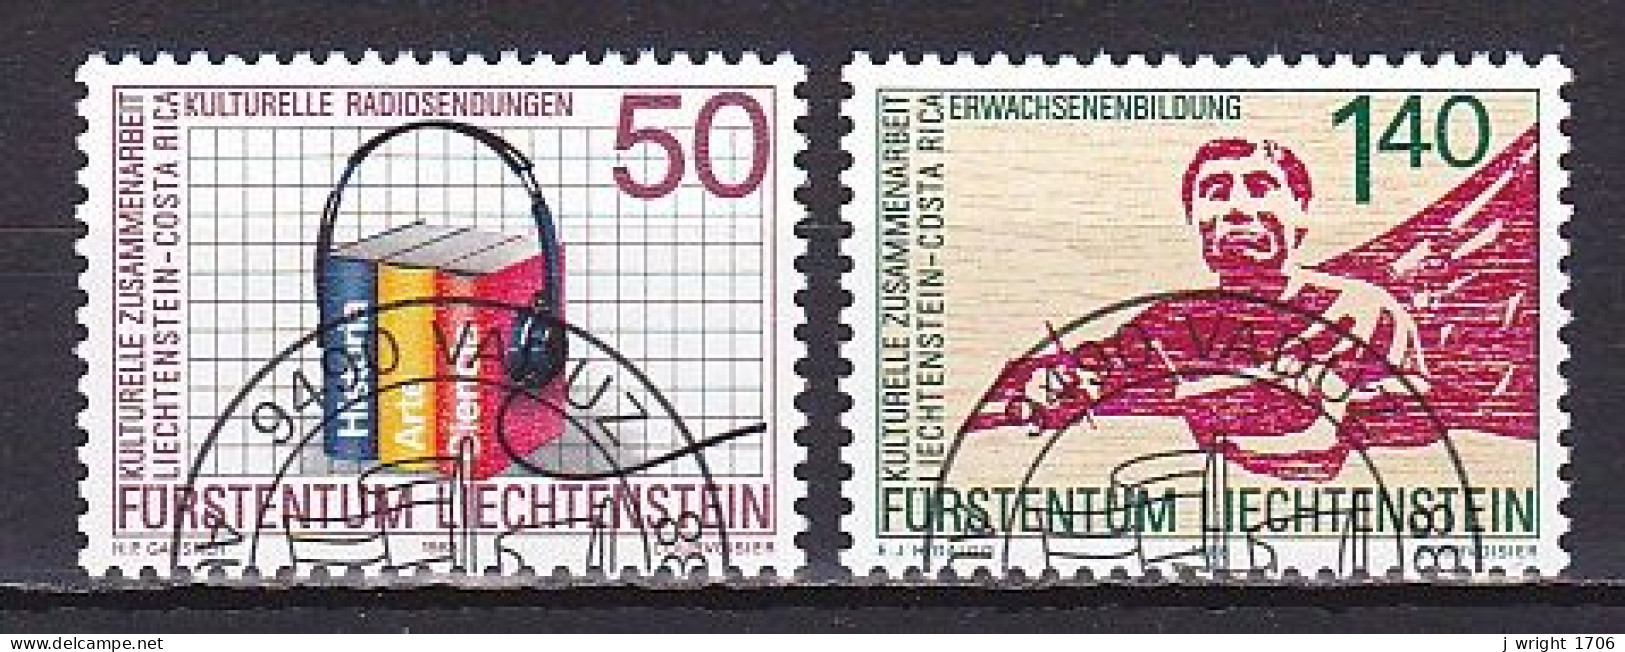 Liechtenstein, 1988, Cultural Co-operation With Costa Rica, Set, Cto - Unused Stamps